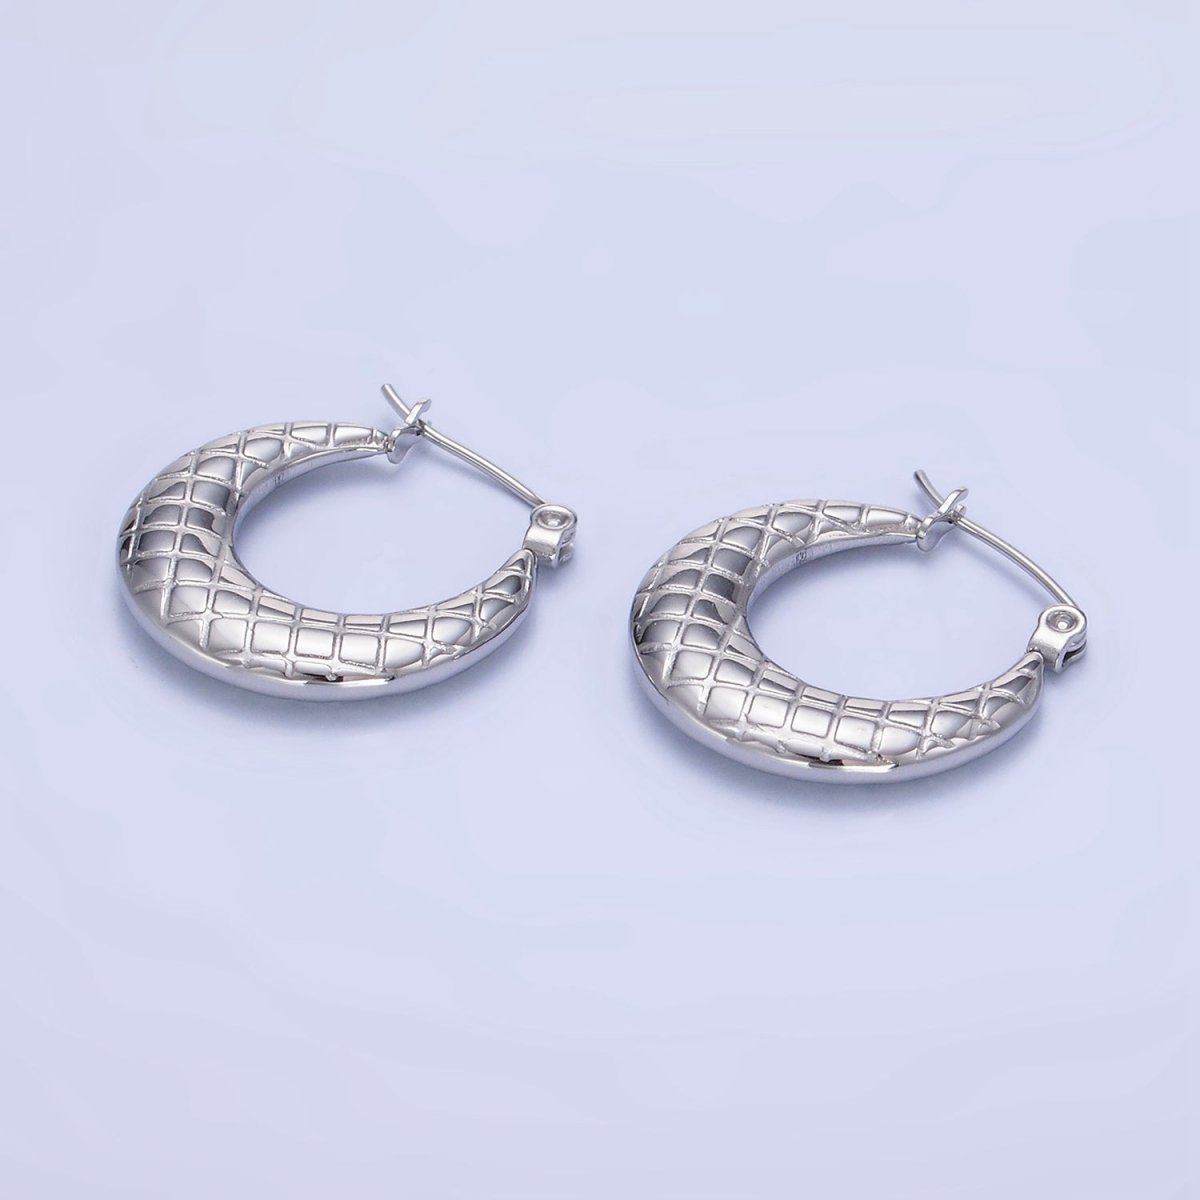 Stainless Steel 20mm Quilted Lined Latch Hoop Earrings in Gold & Silver | AB1378 AB1379 - DLUXCA